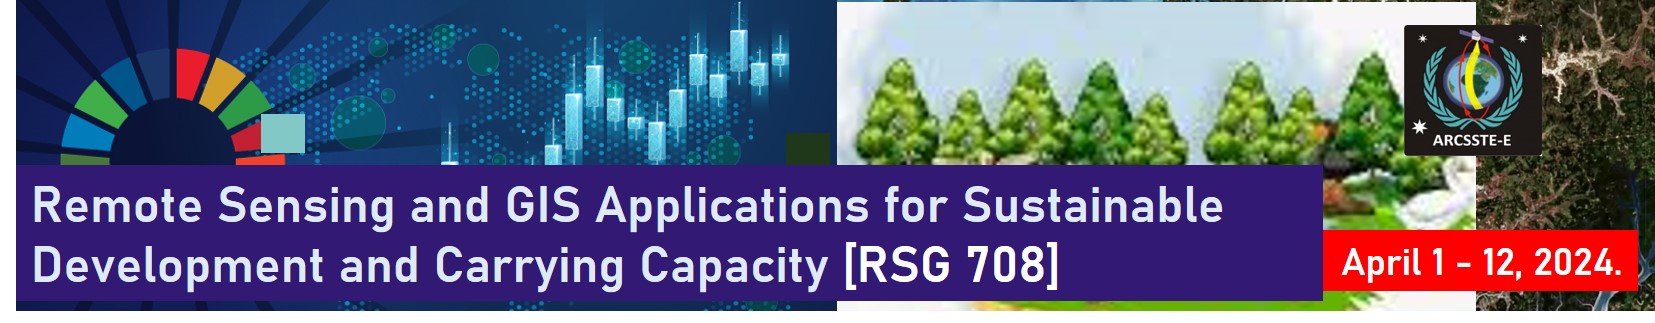 Remote Sensing and GIS Applications for Sustainable Development and Carrying Capacity [RSG 708] 